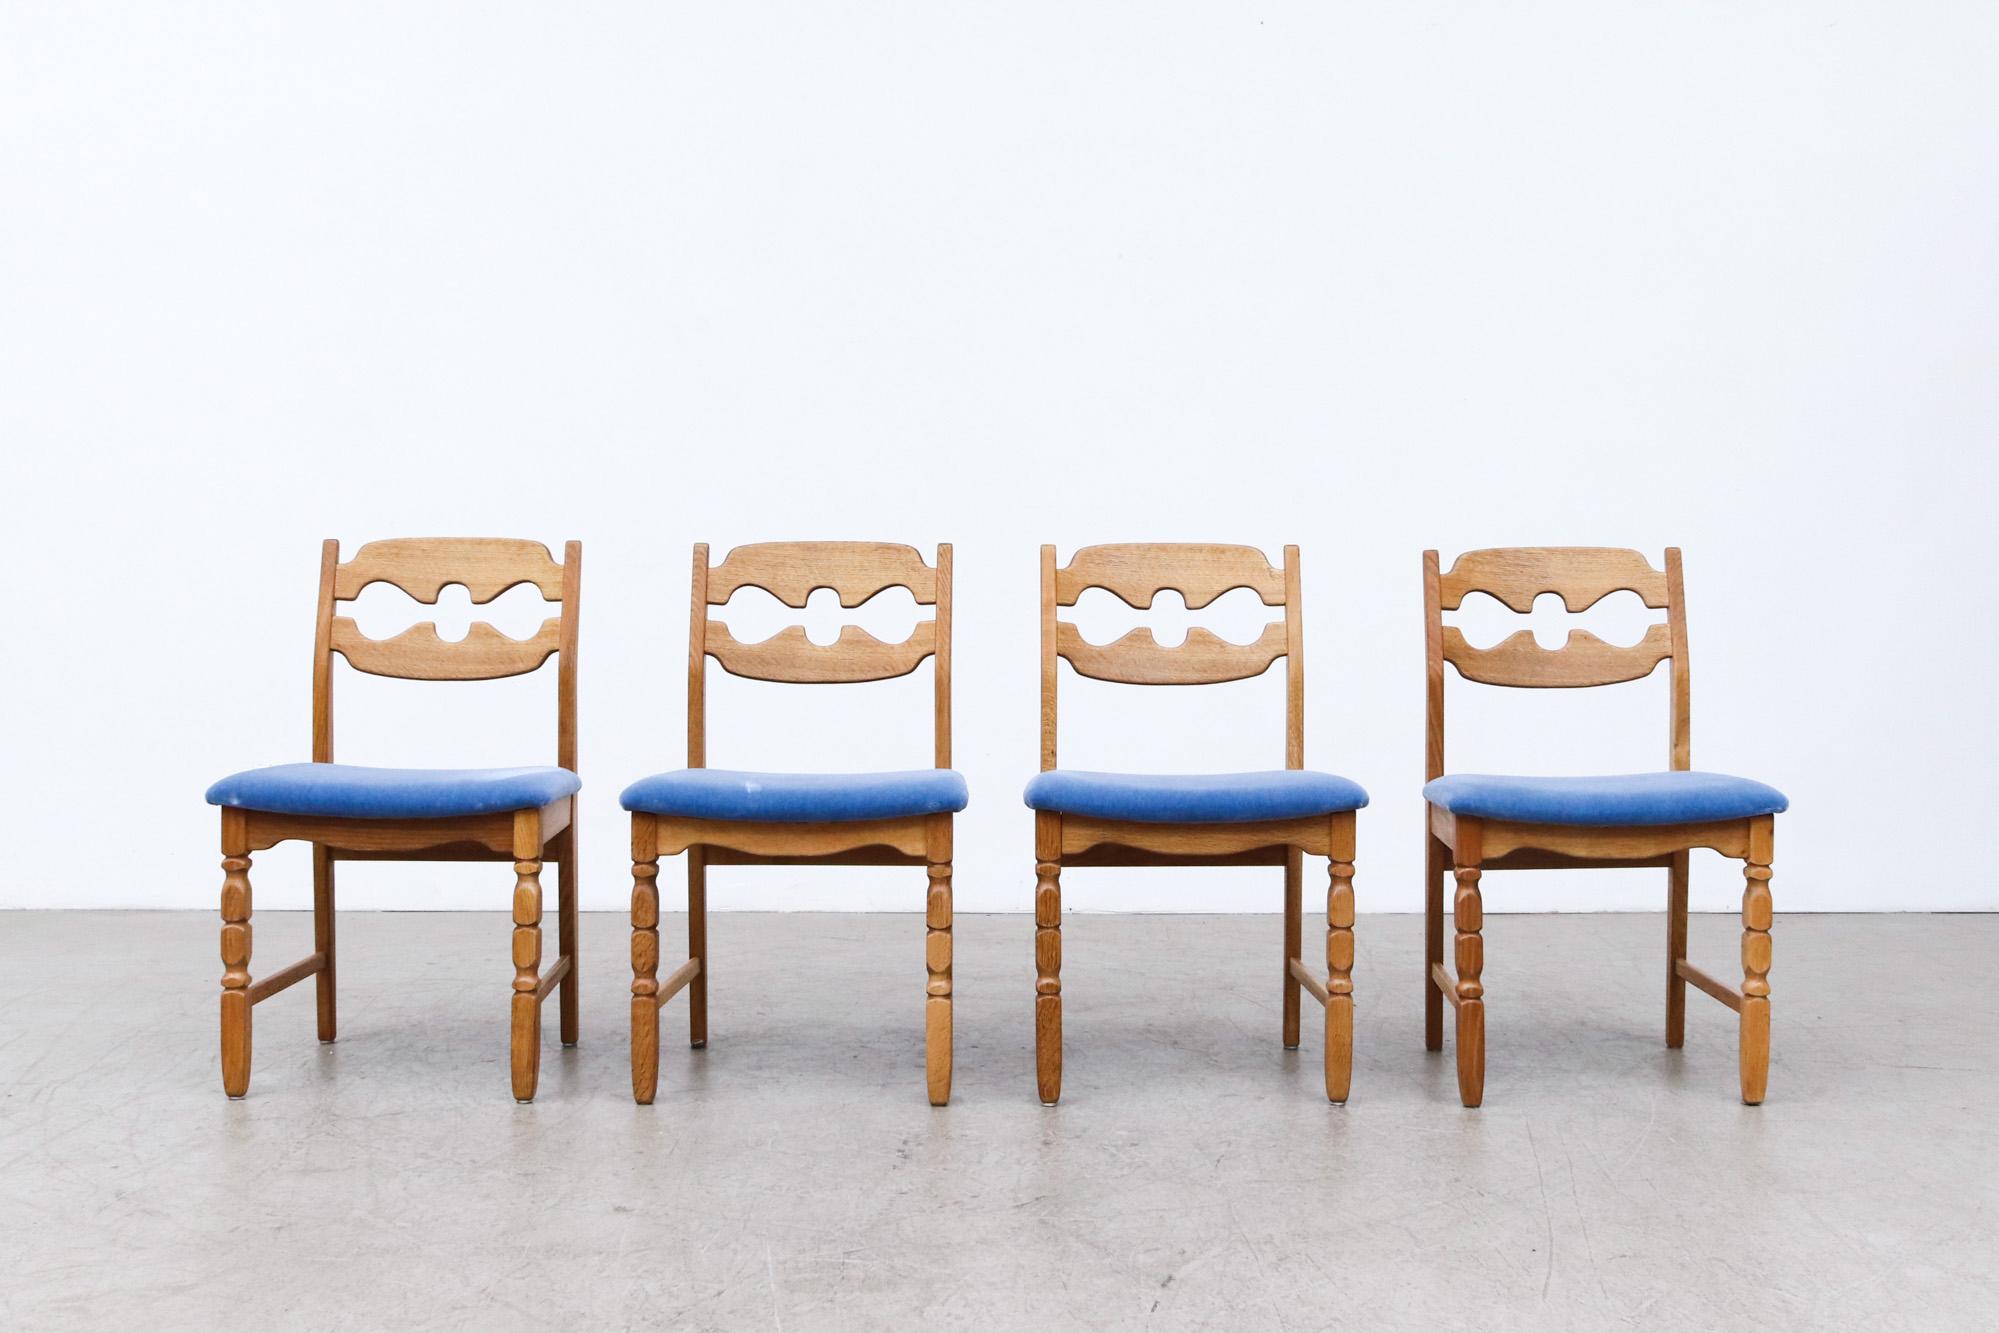 Set of 4 Brutalist Razor back oak dining chairs by Henning Kjaernulf for Nyrup Møbelfabrik with Upholstered Blue Velvet Seats. Shown with matching dining table with 2 Extension Leaves (sold). In original condition with wear consistent with their age